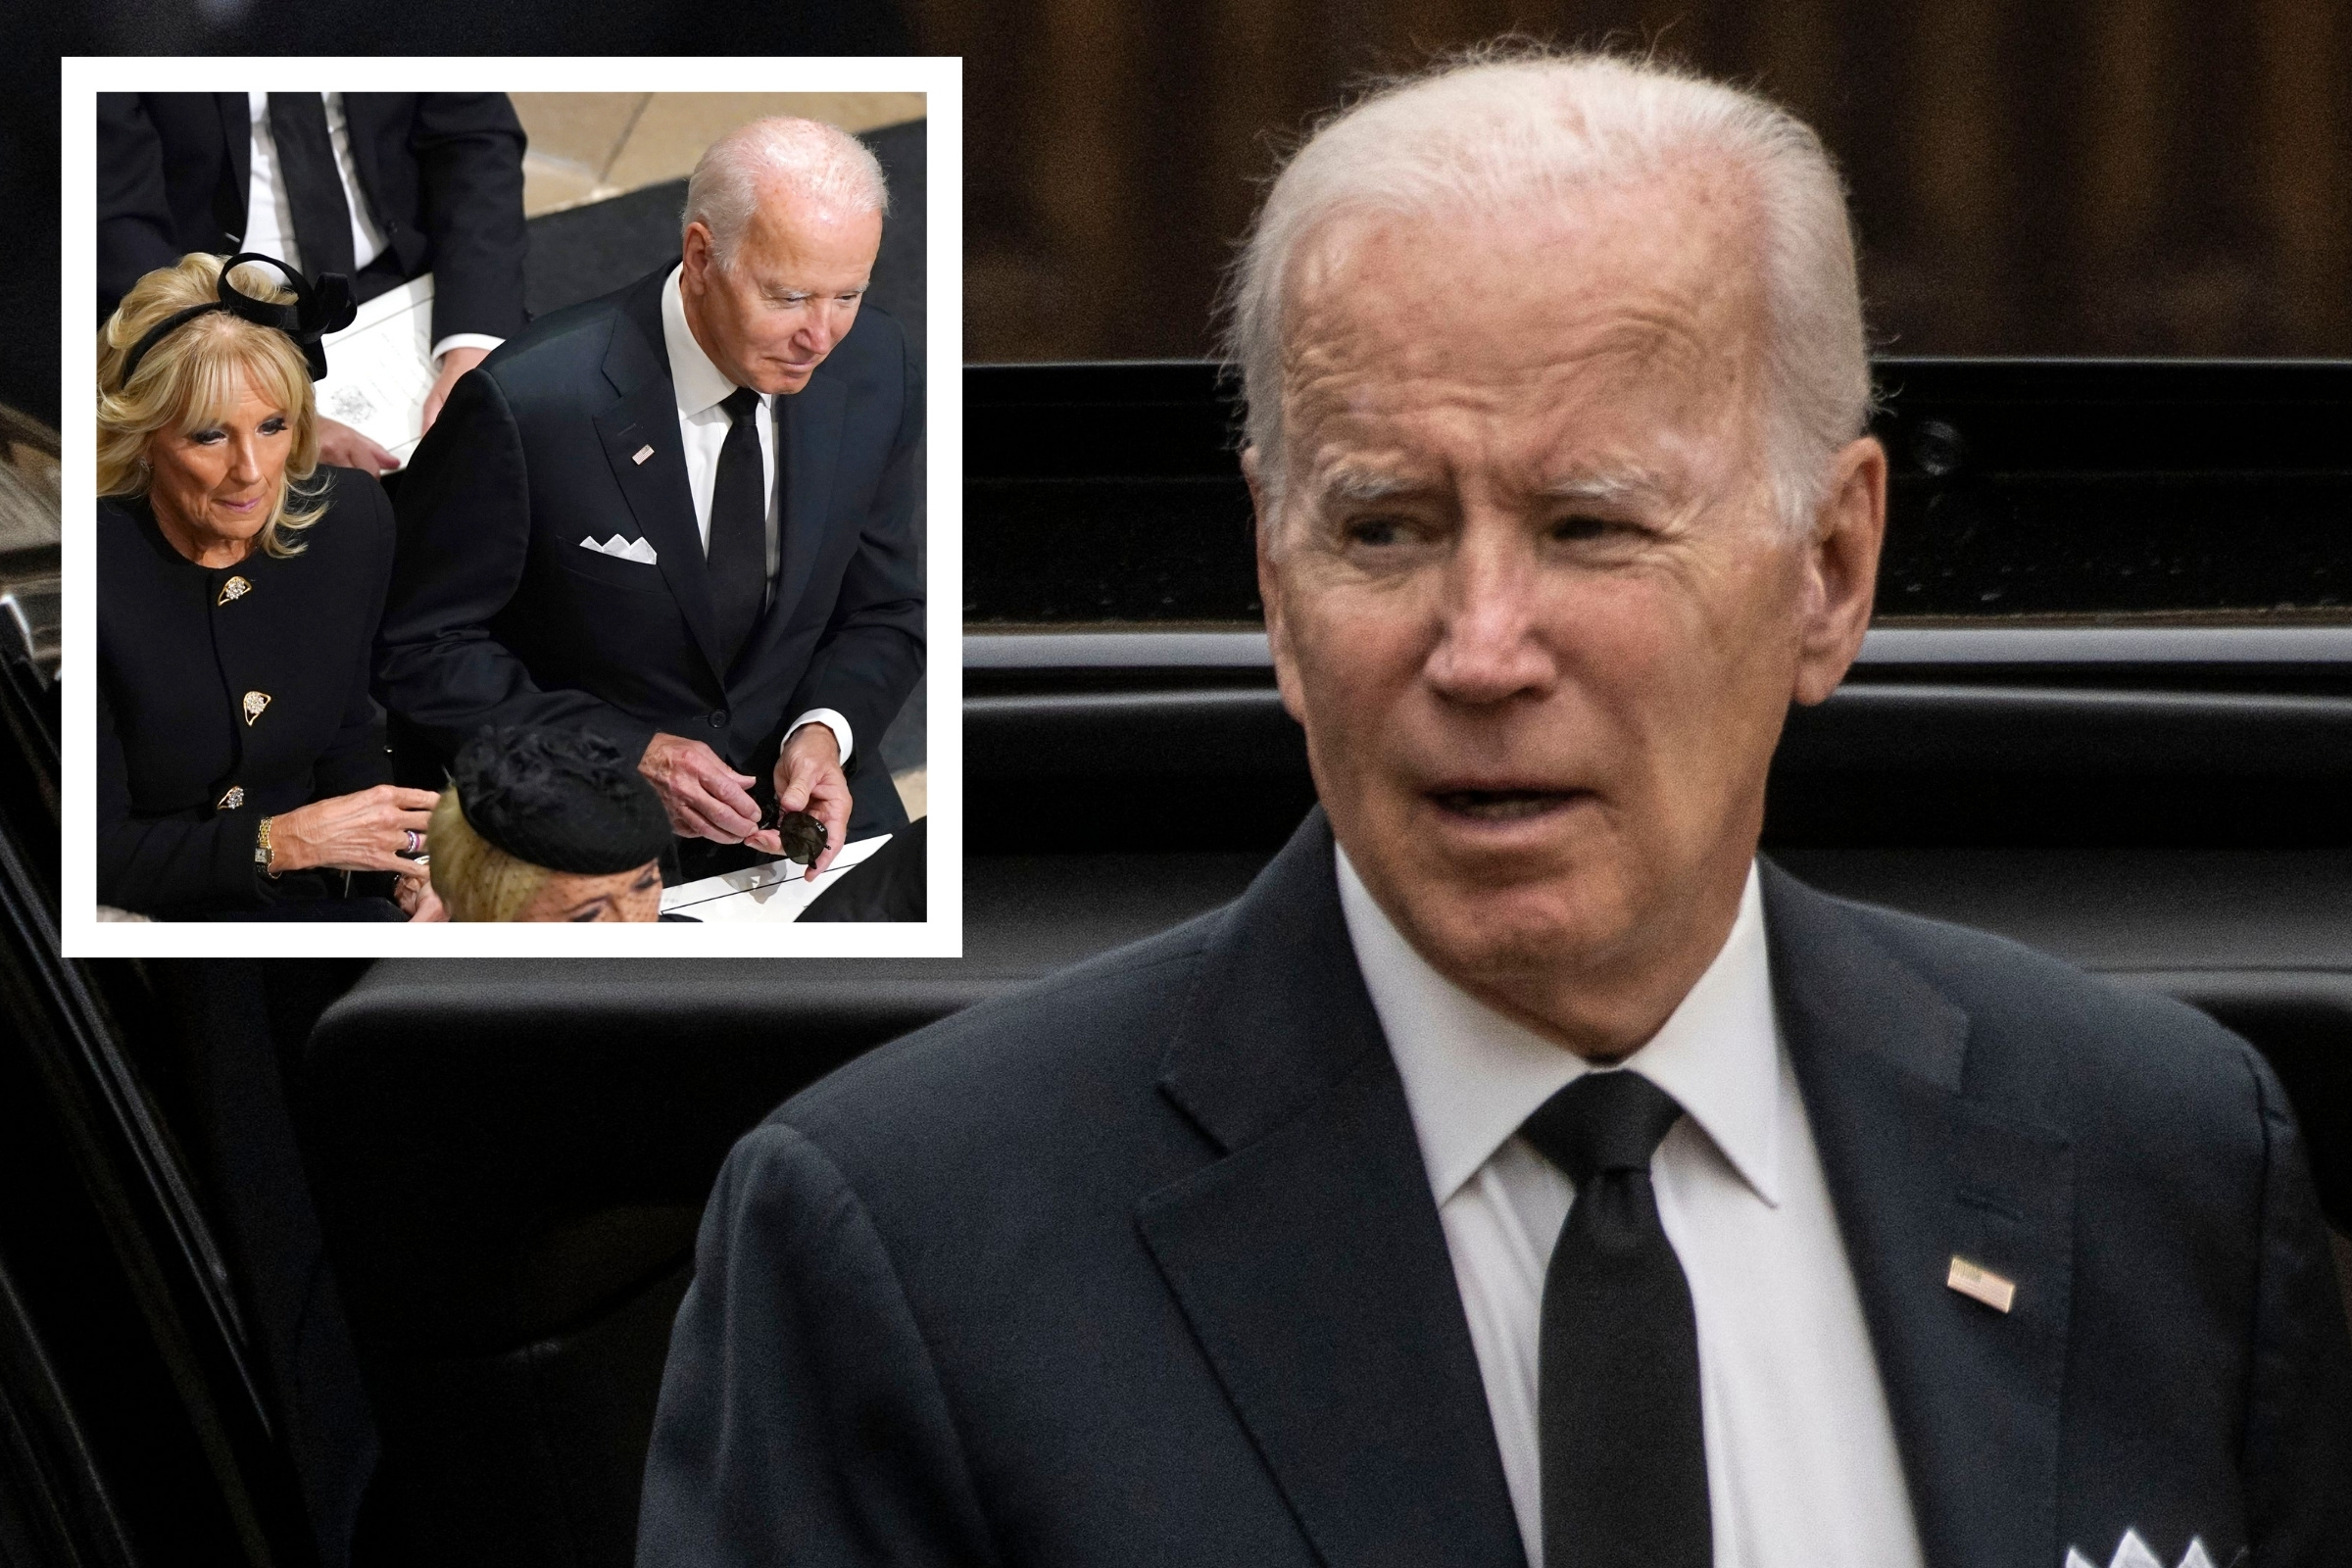 Unmasking The Mystery: Who Is The Person Sitting Behind Joe Biden?